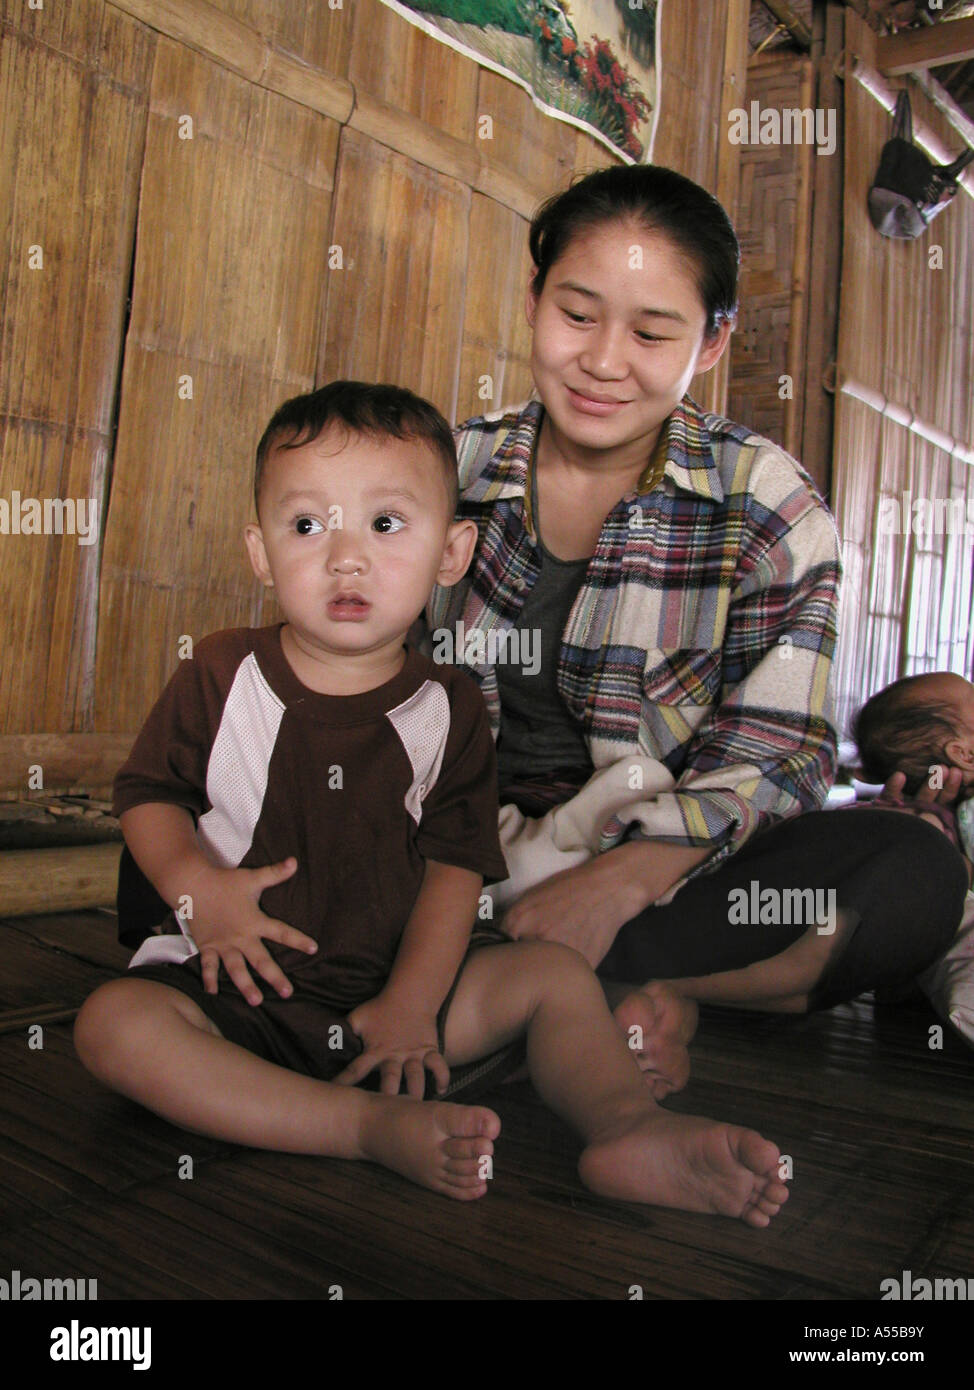 Painet ip2824 9712 thailand mother child burmese refugees mae camp sot country developing nation less economically developed Stock Photo